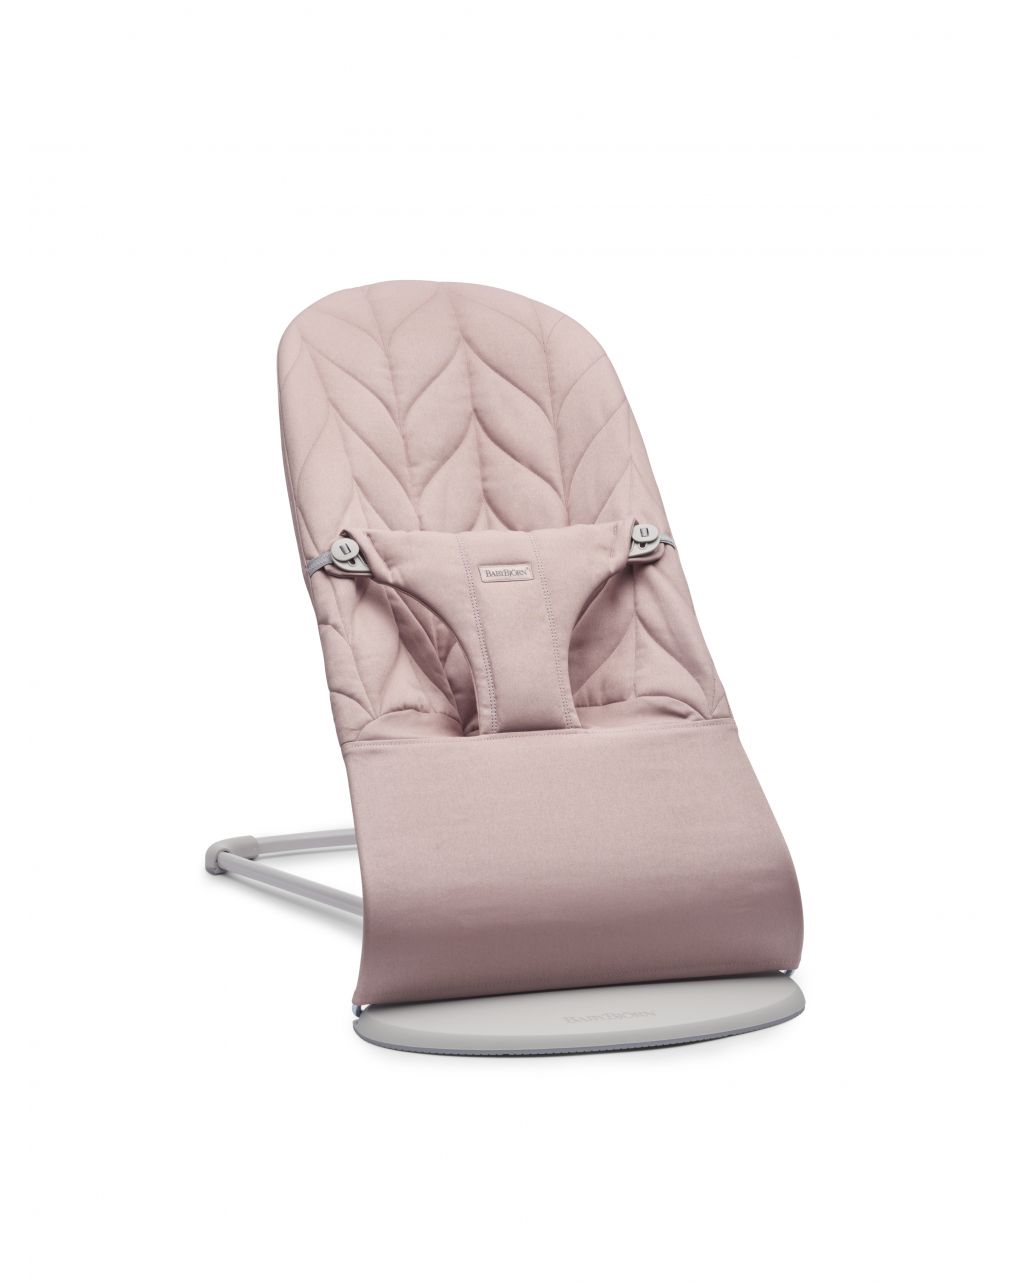 Bliss petal cotton quilted bouncer pink - babybjörn - Babybjorn